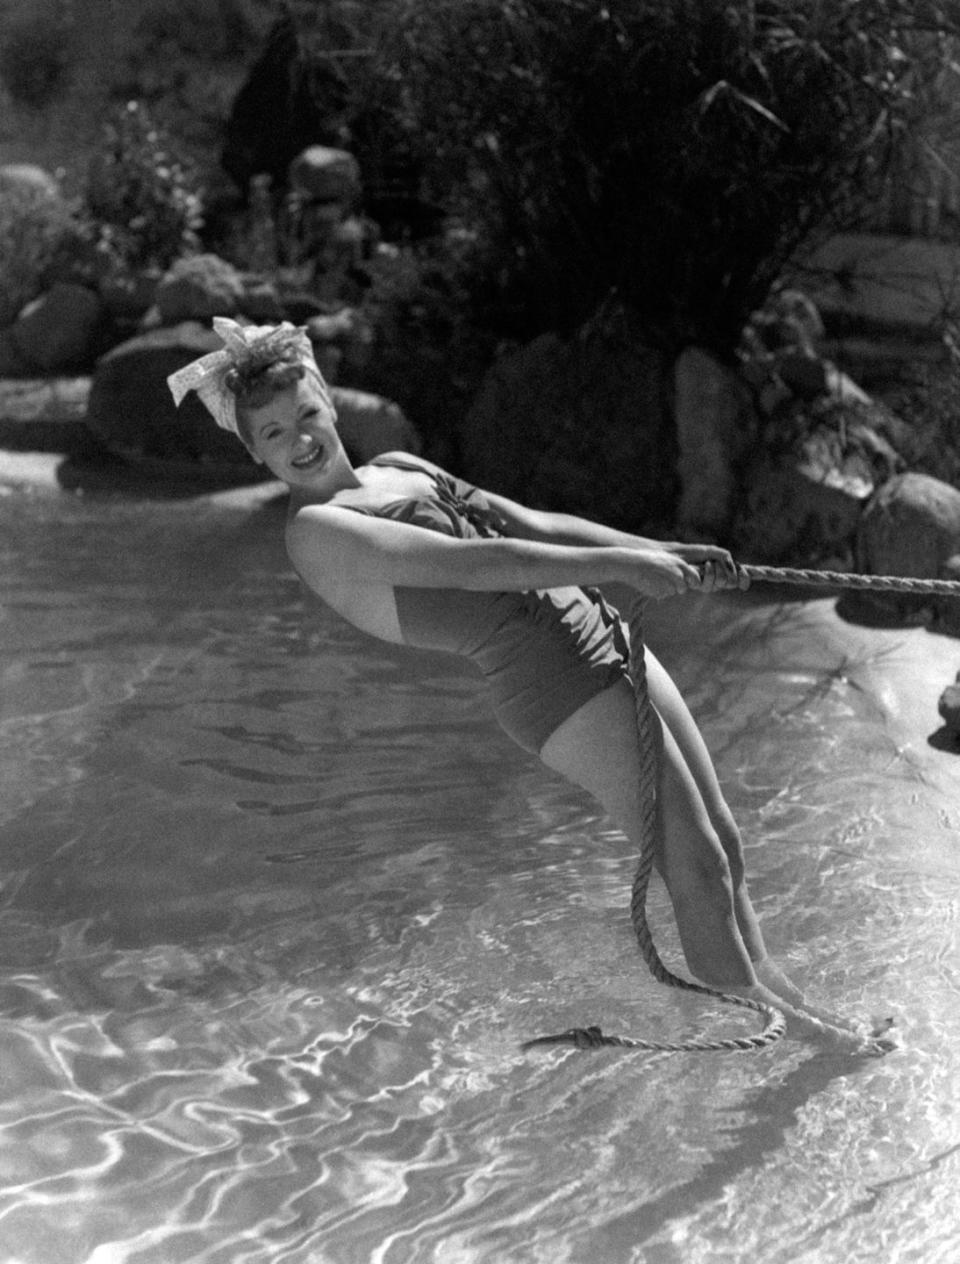 1940: Rocking a swimsuit with a cute vintage hairdo